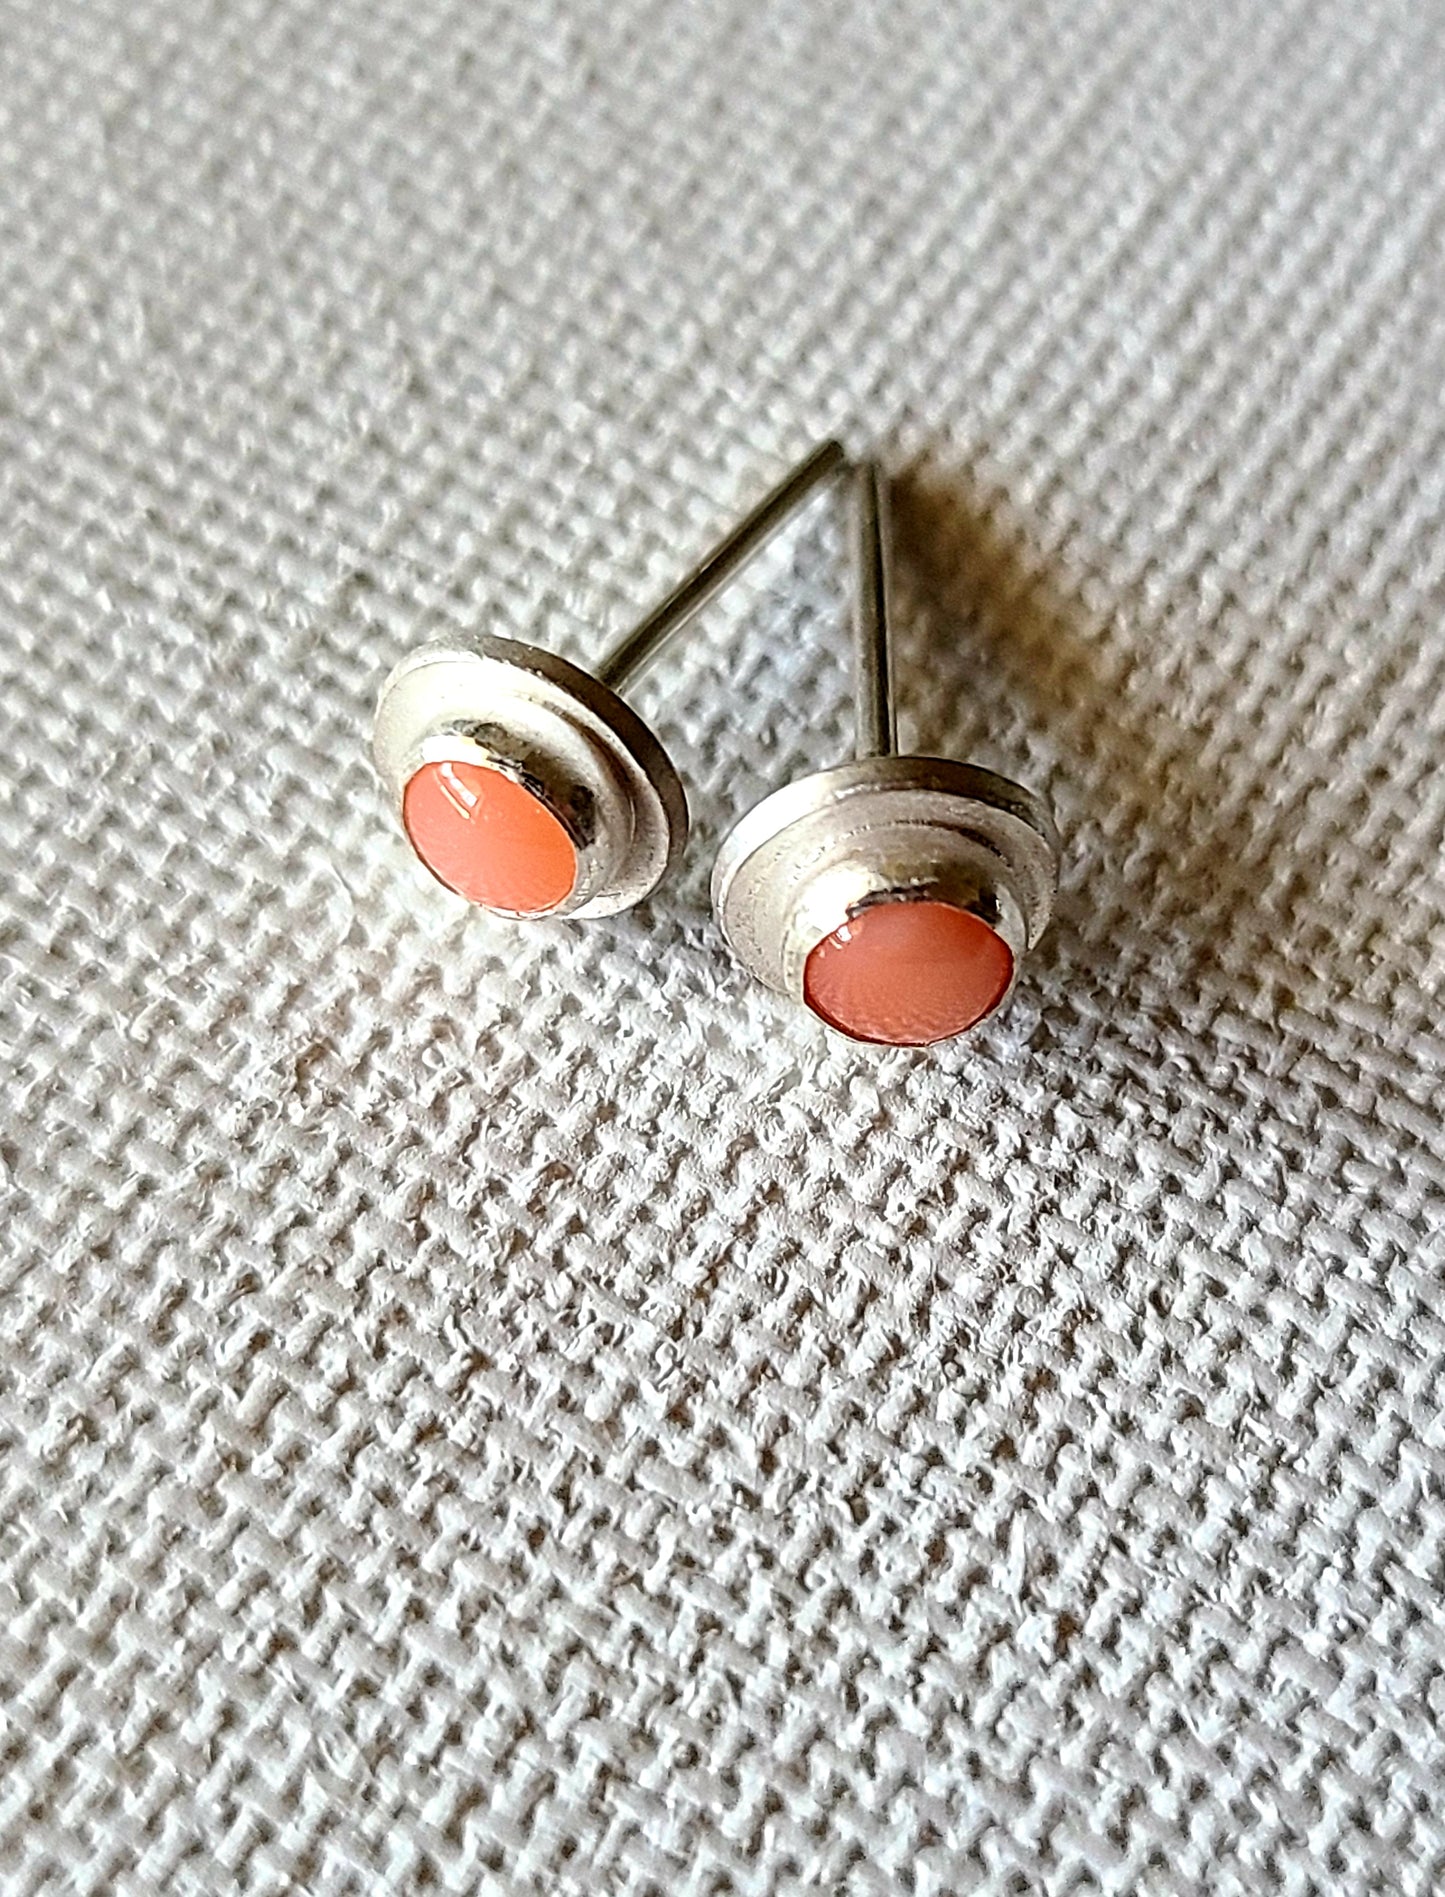 Peach Coral stud earrings-Last Pairs Available!